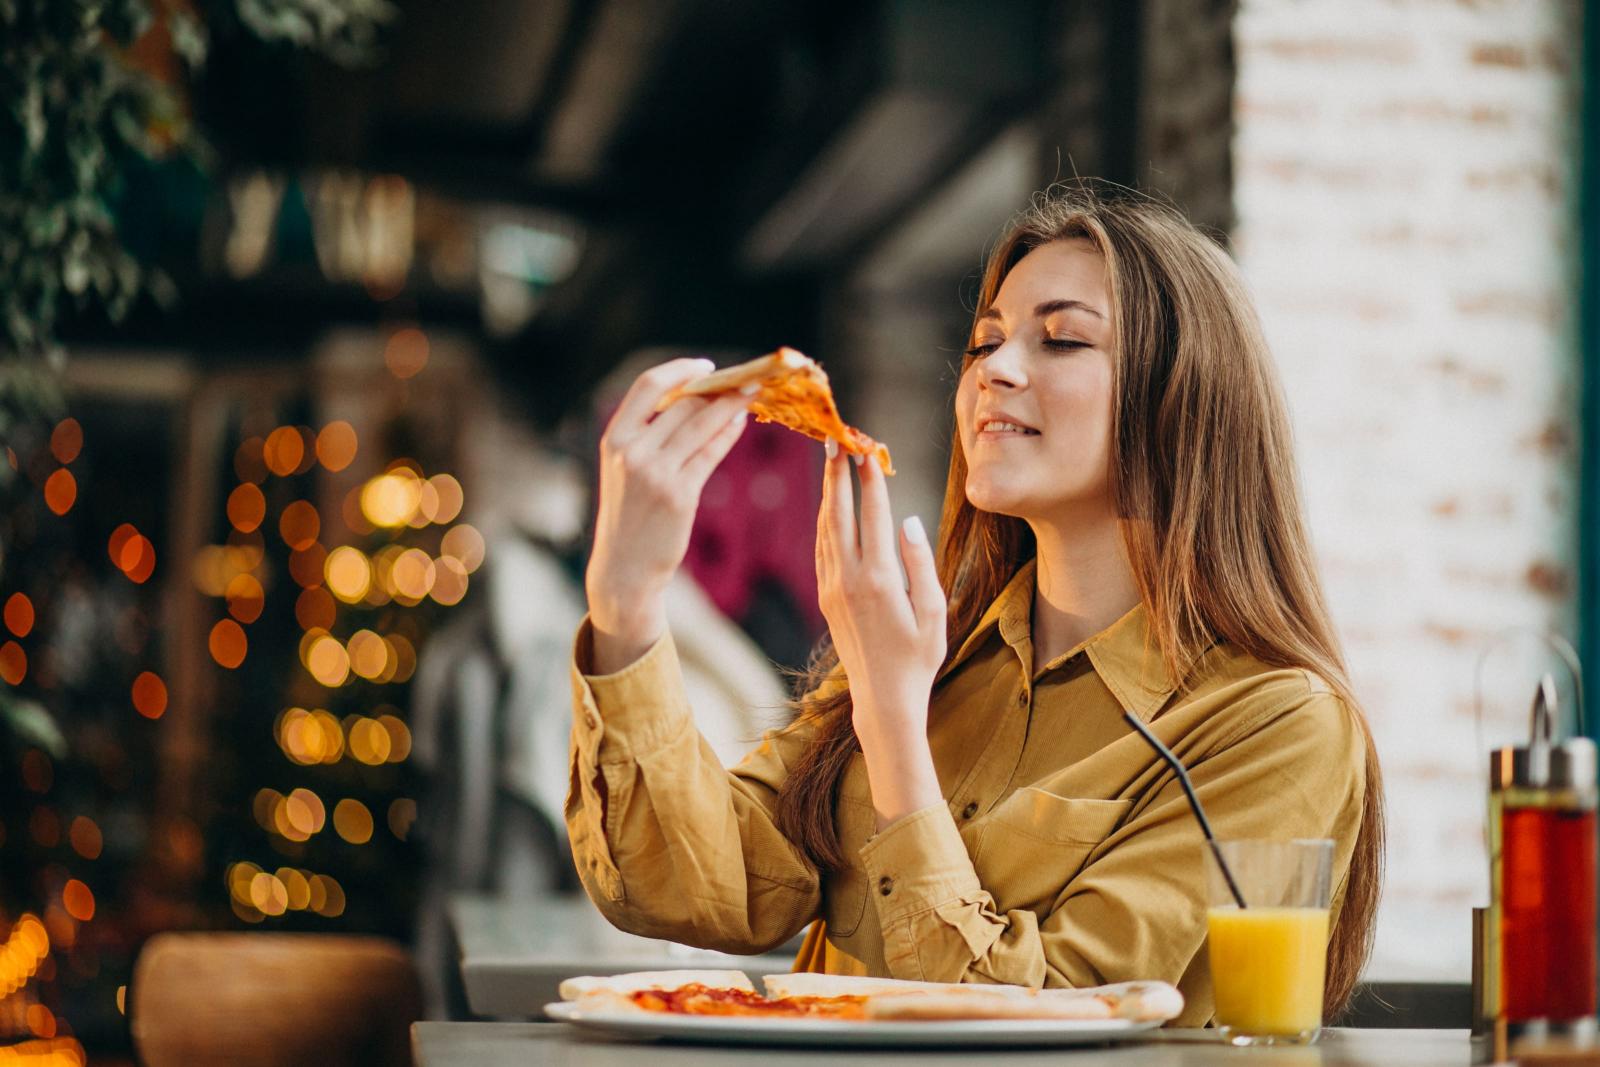 Eating this food makes you happier, according to science